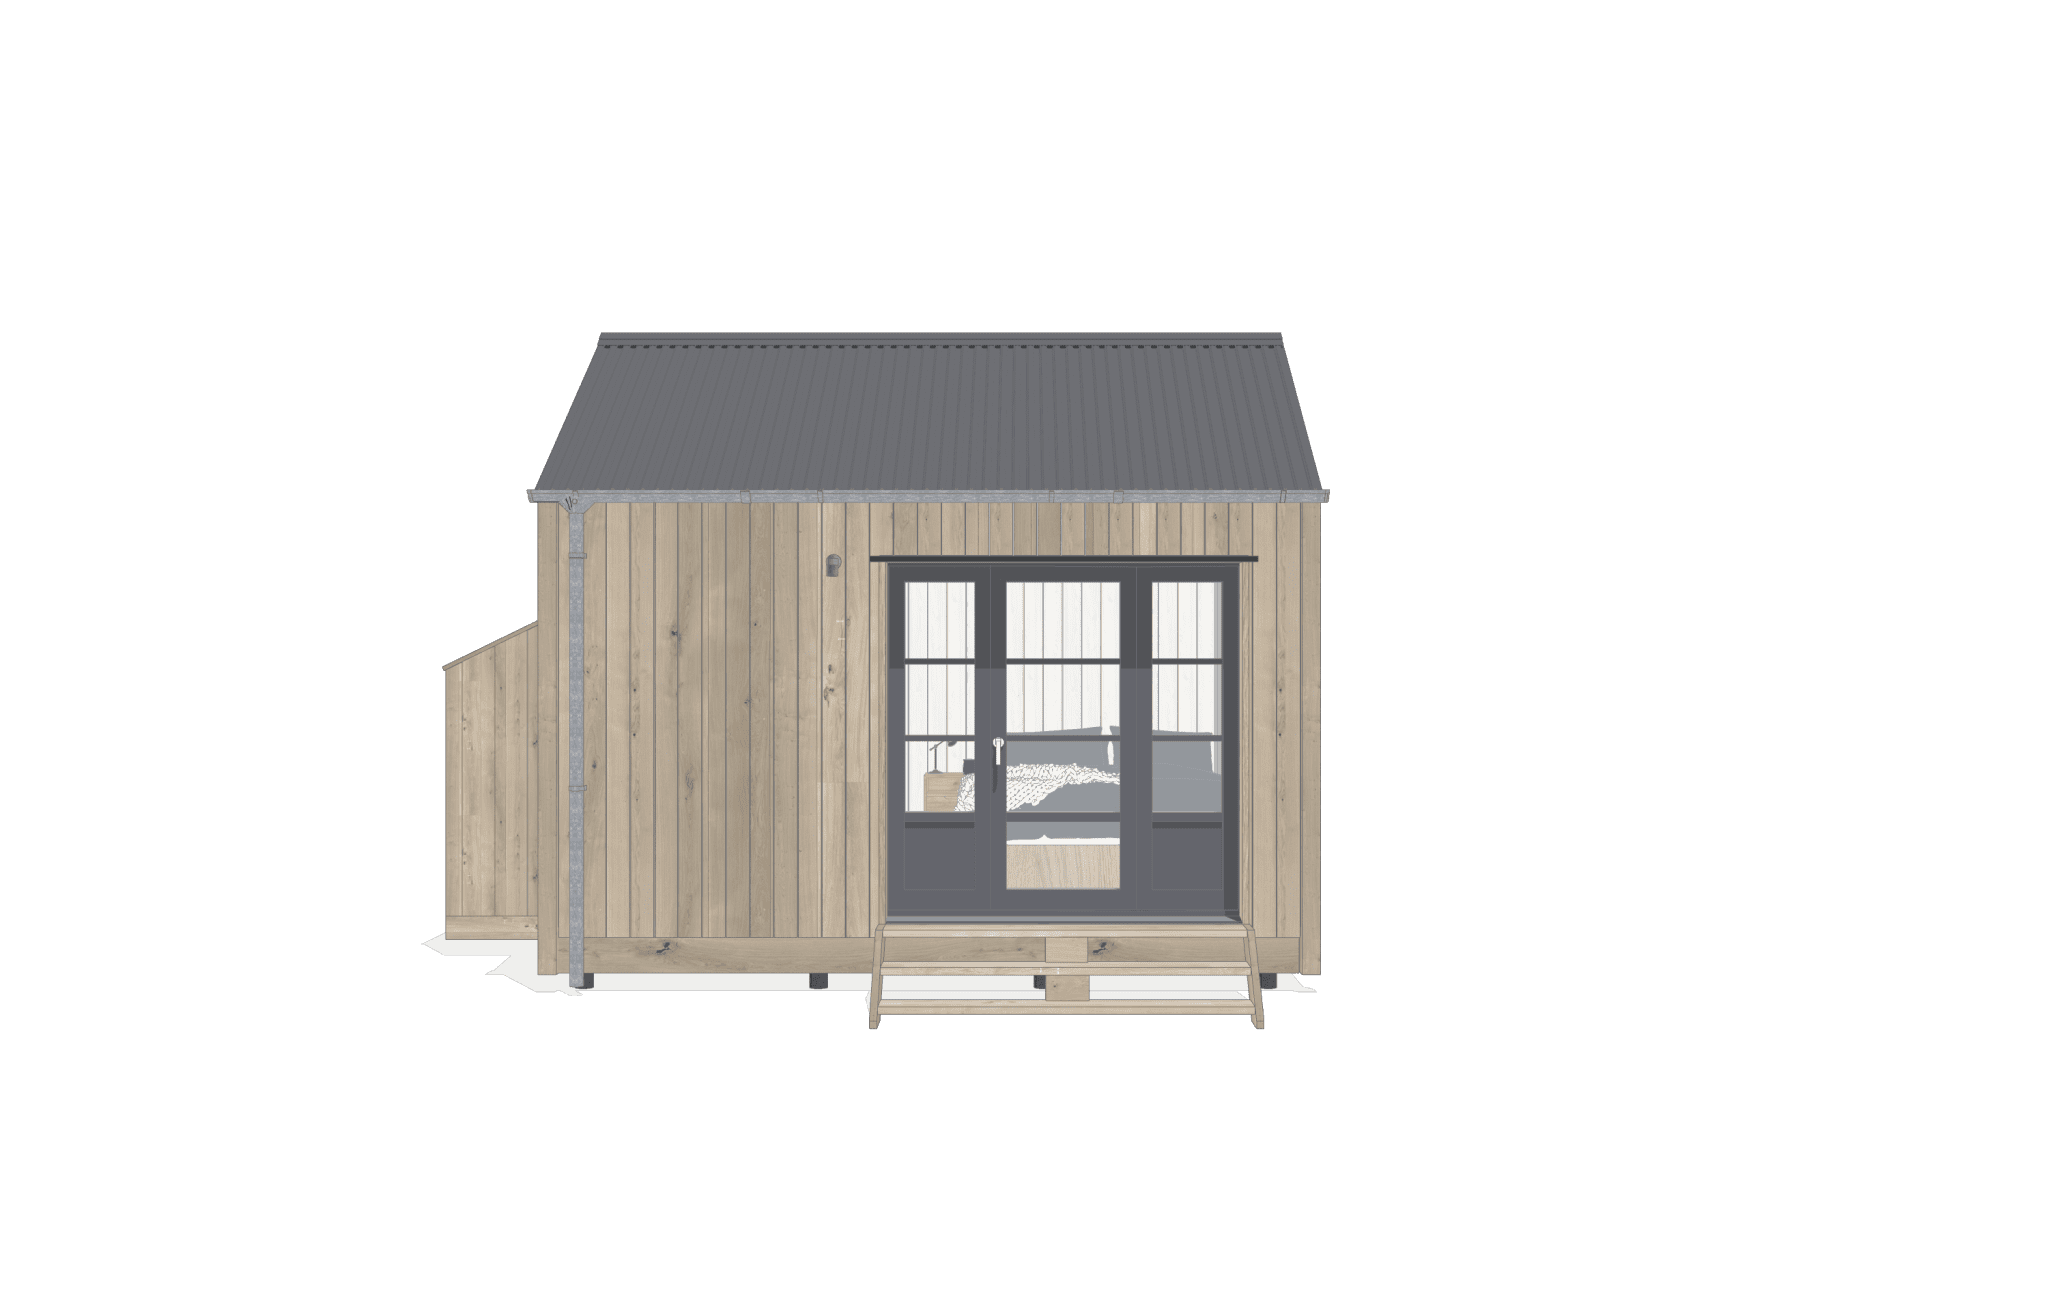 A accommodation pod cabin suibale for hotels or pubs or glamping sites